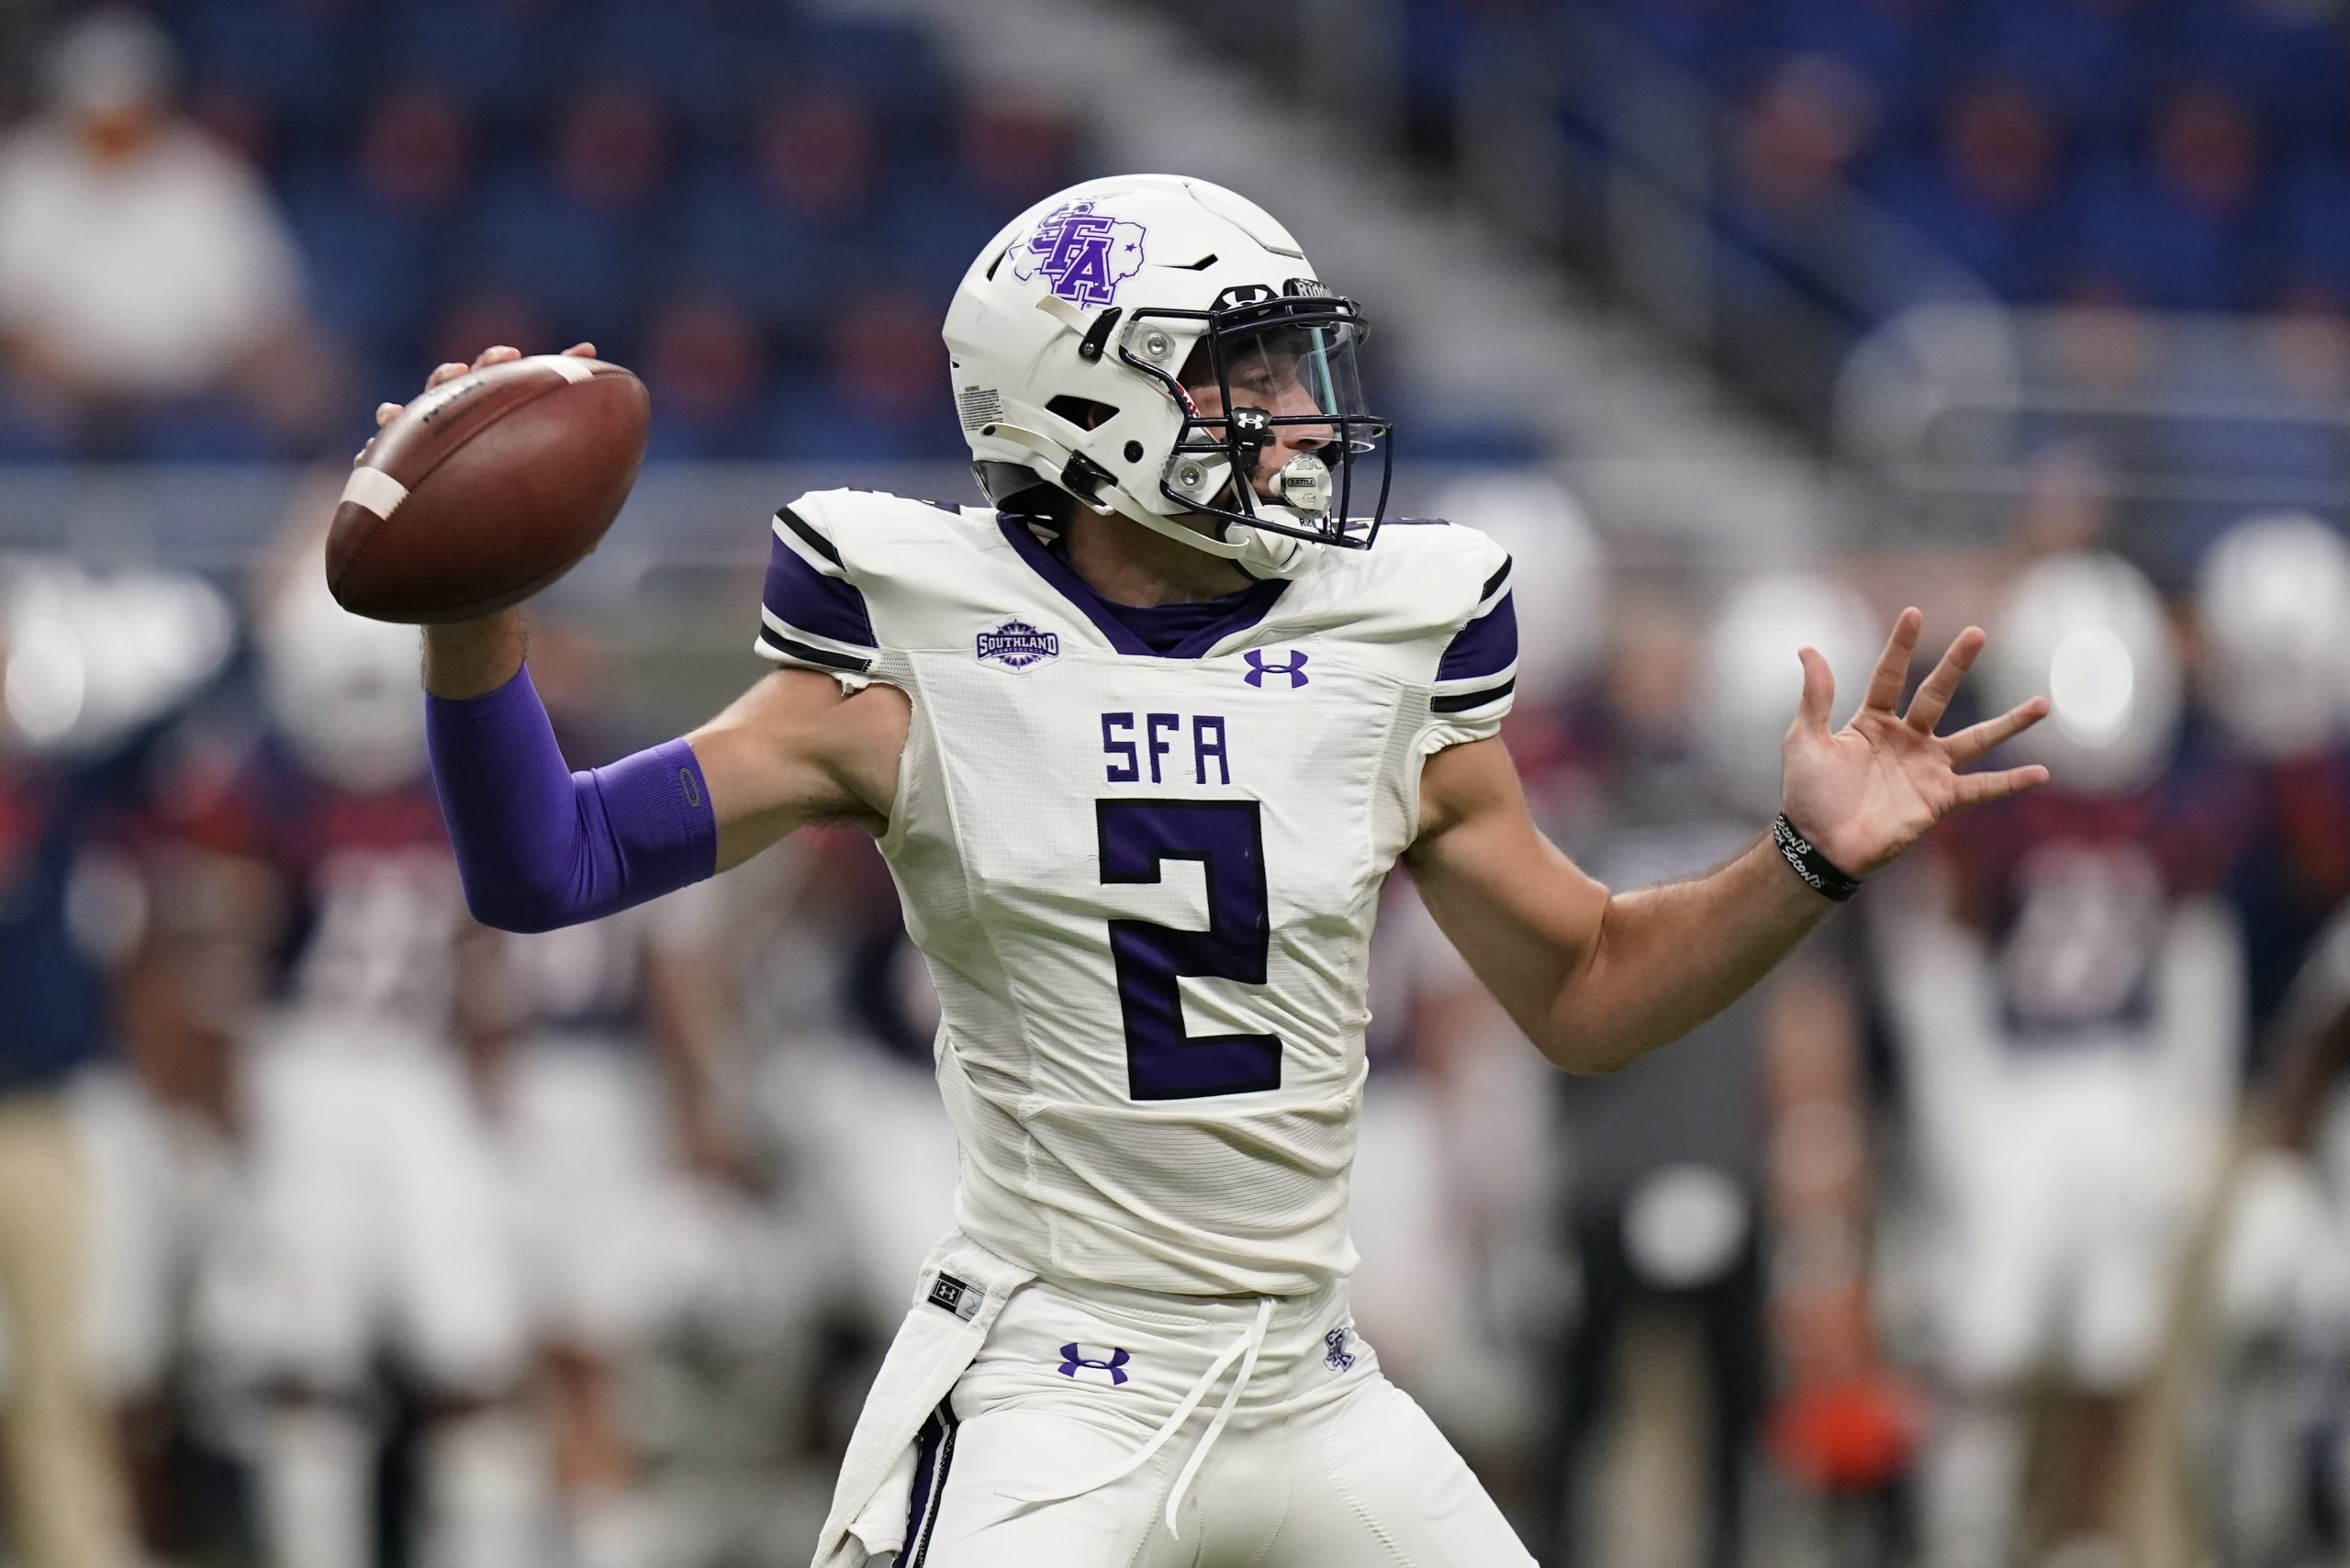 2022 FCS College Football: Top Returning Offensive Statistical Leaders